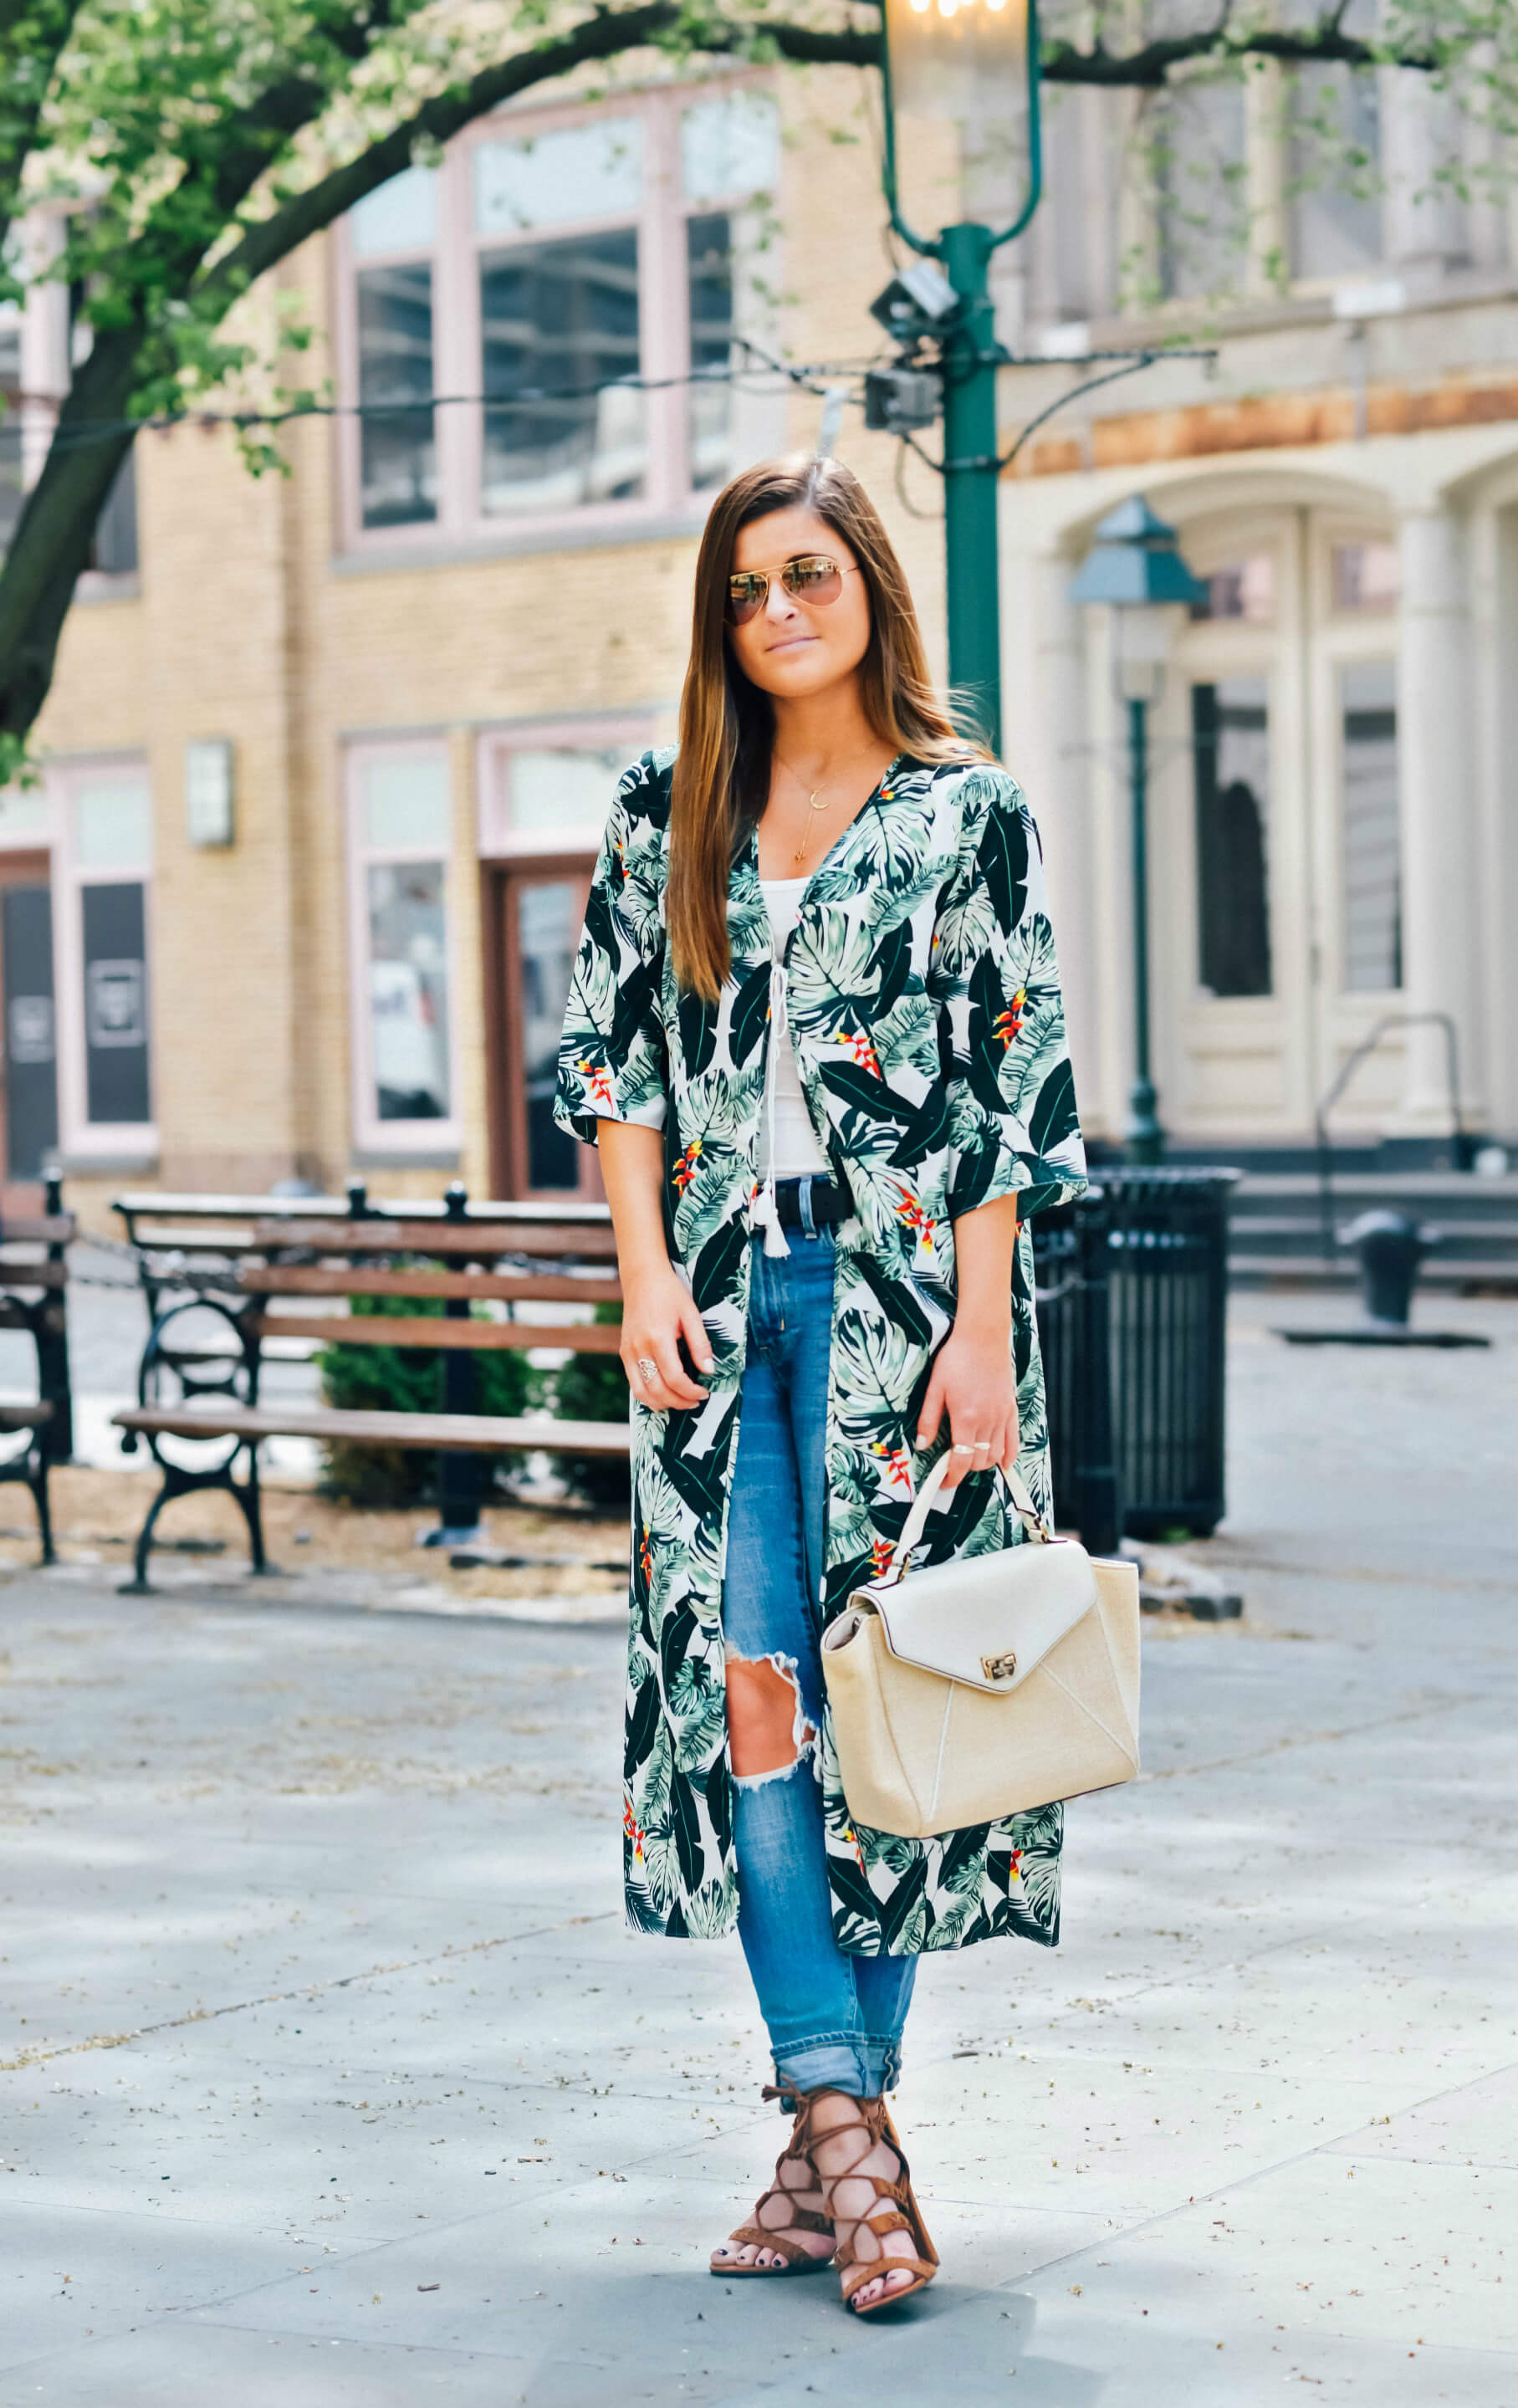 Rachel Zoe Collection Palm Print Duster, Kate Spade Straw Bag, Levi's 721 High Rise Skinny Denim, Lili Claspe Rope The Moon Necklace, Spring Style, Tilden of To Be Bright